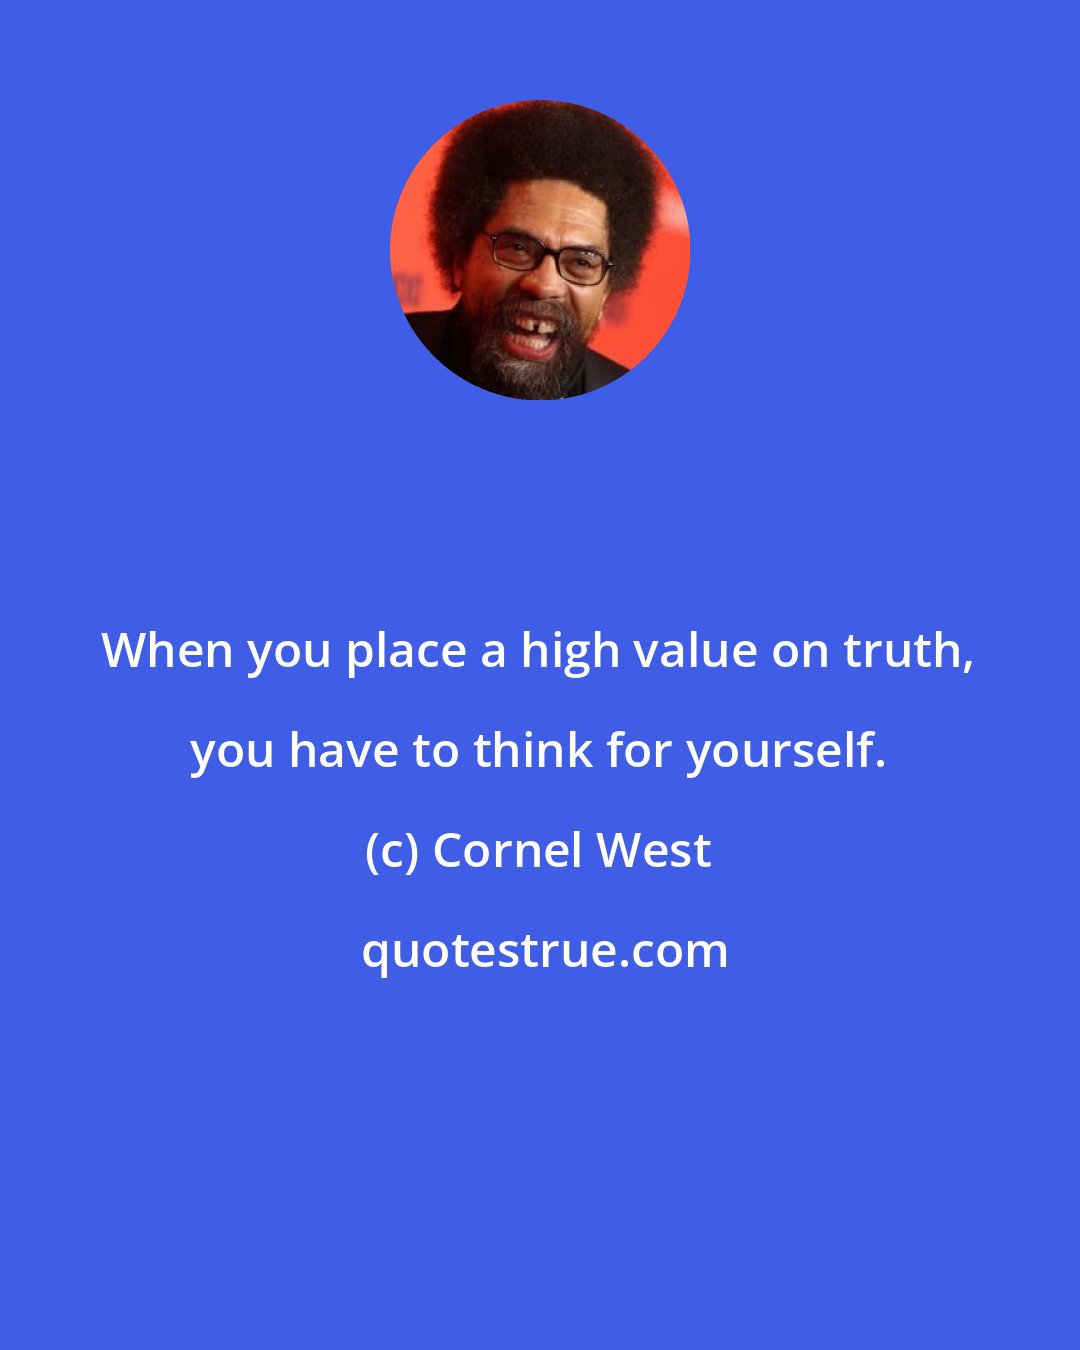 Cornel West: When you place a high value on truth, you have to think for yourself.